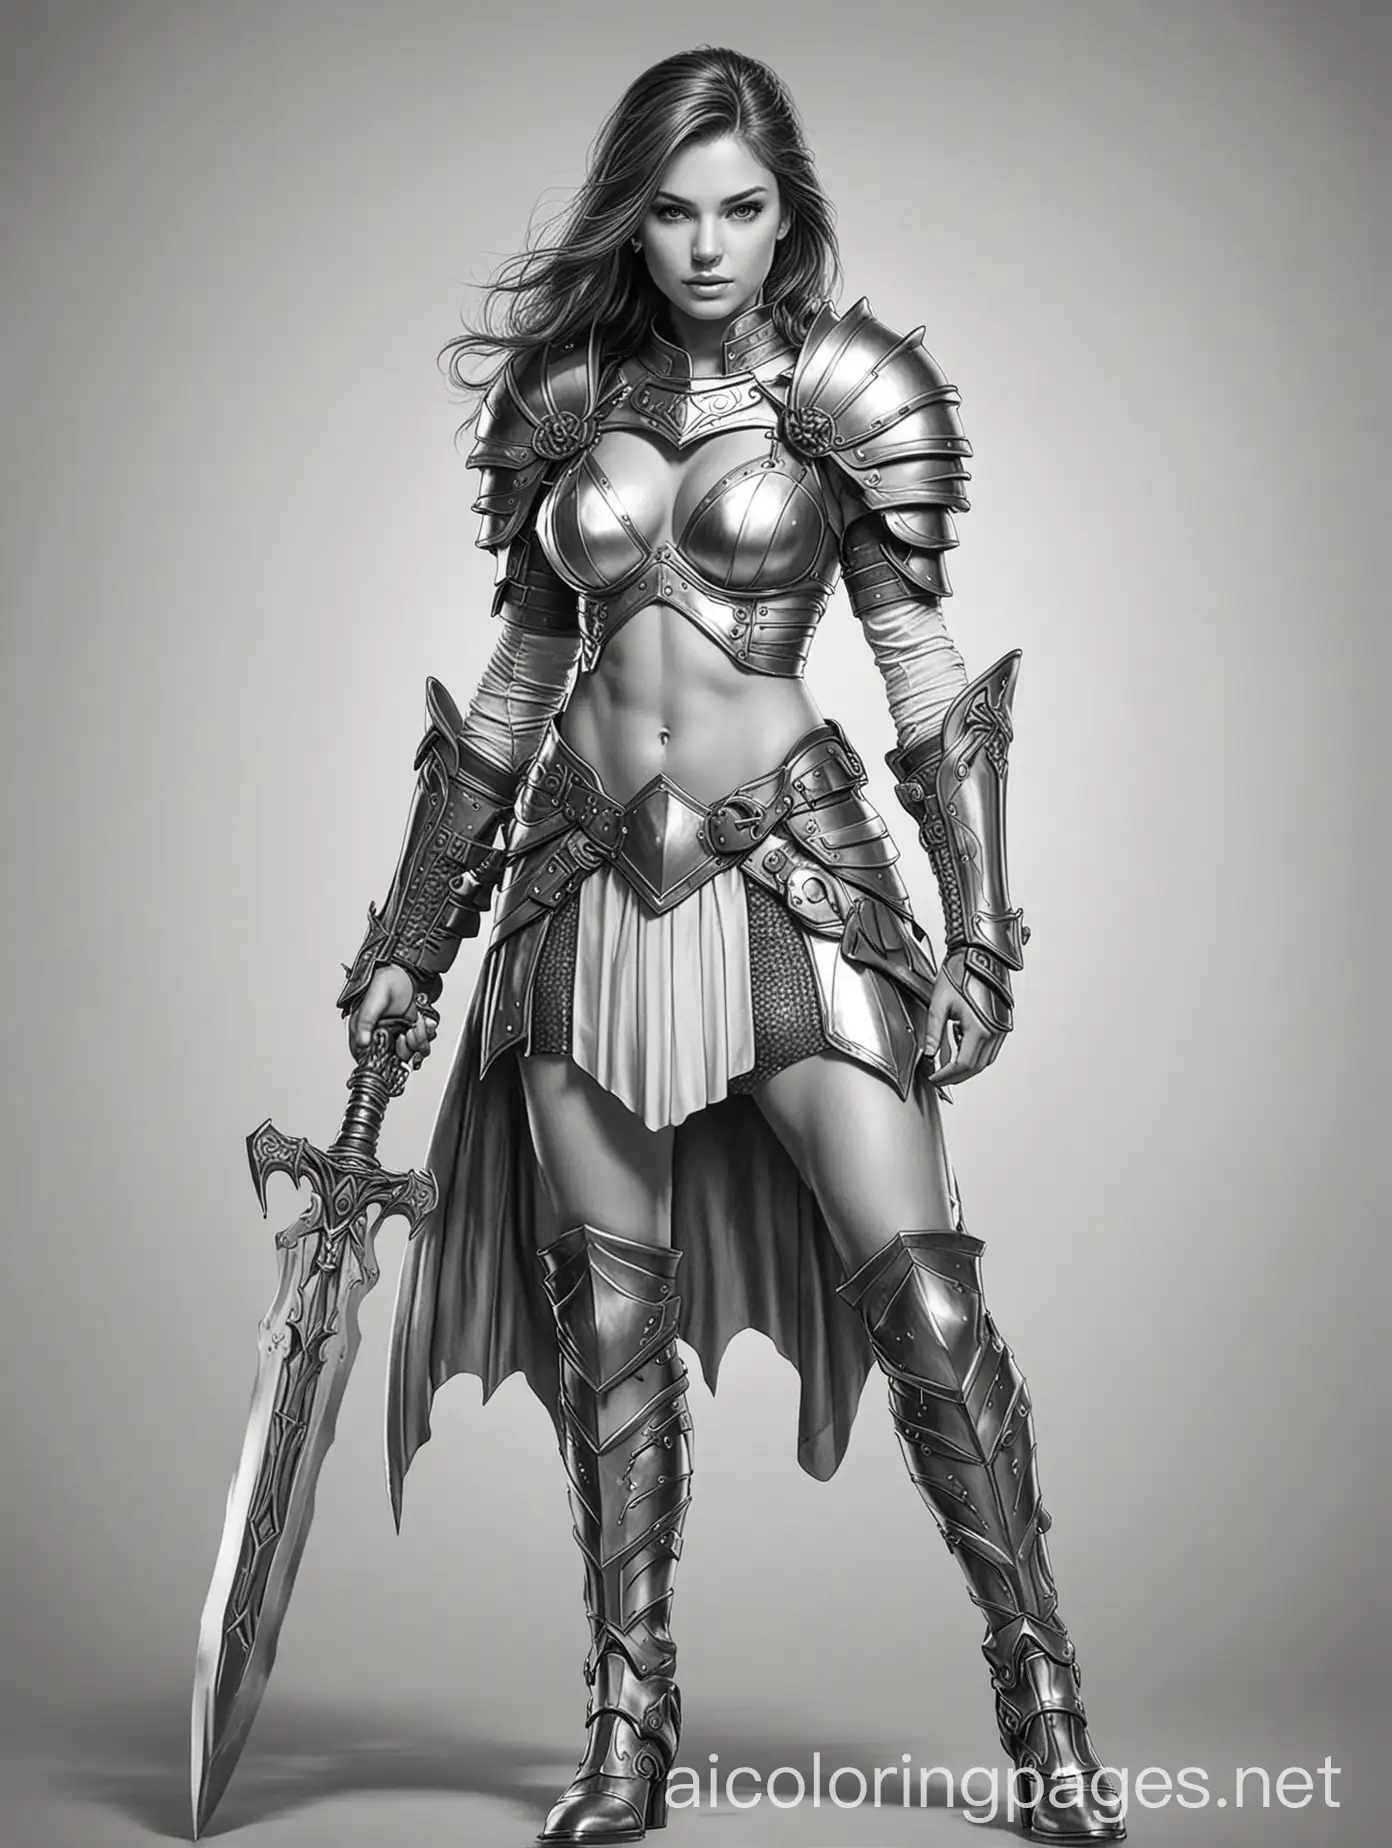 Coloring-Book-Young-14YearOld-Teen-Sexy-Warrior-Woman-Ready-to-Fight